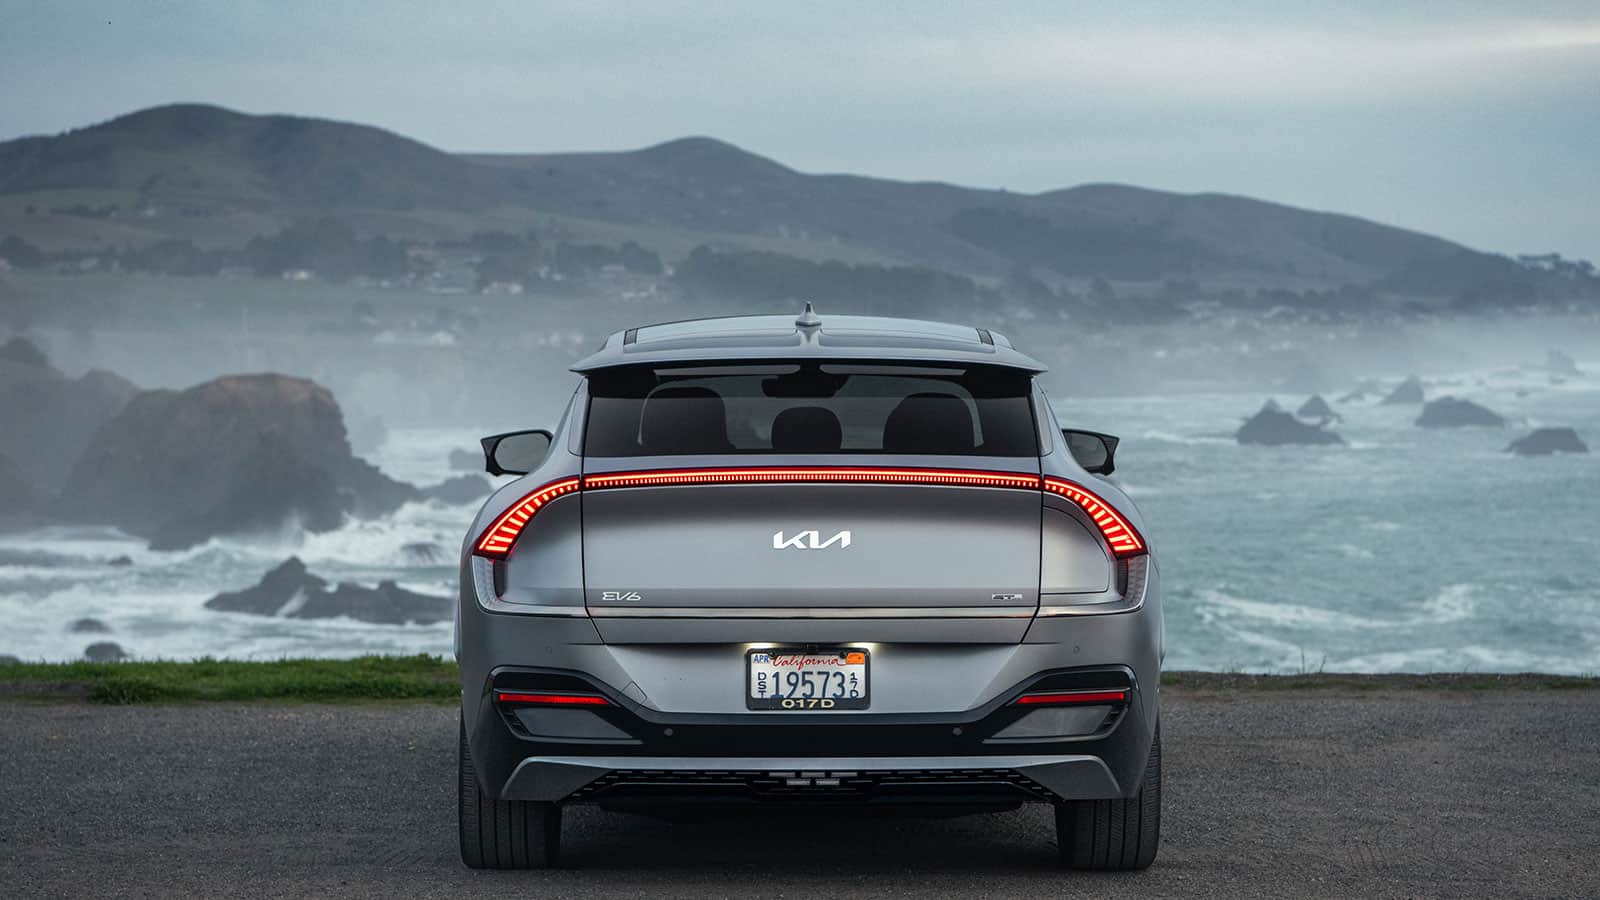 Kia America Sales EV6 parked and looking out at a rough ocean coast